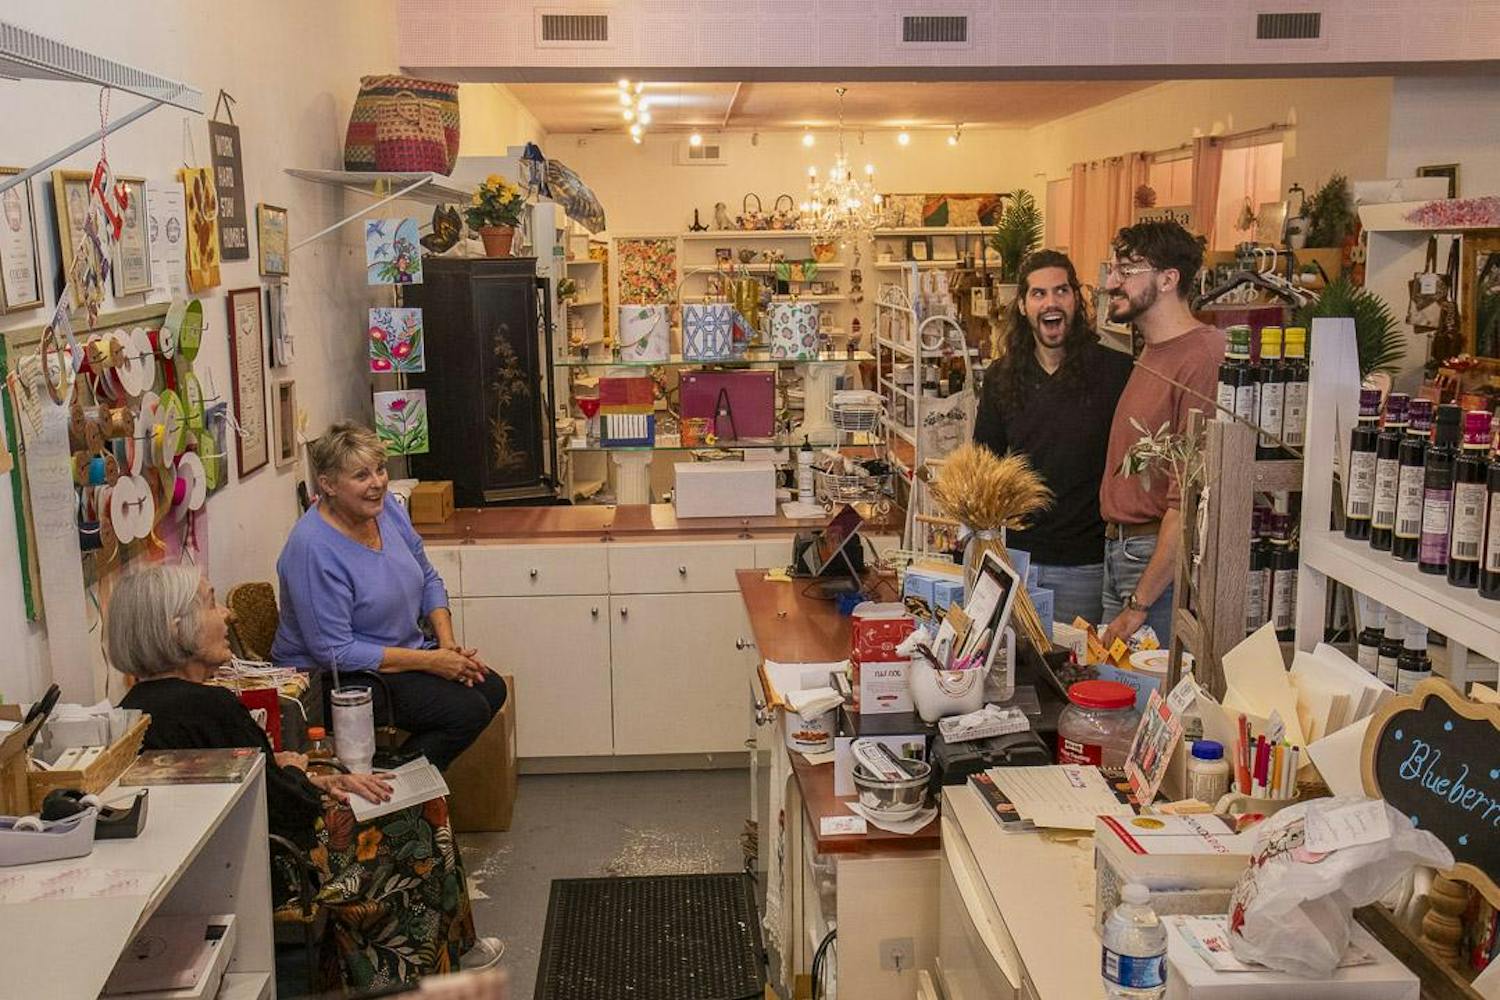 Gibson’s Gifts employees Mary Hanh (left) and Geneva Mobley (second to left) joke with Micah Peroulis (second to right) and William Miller (right) on Oct. 12, 2023. The store, known for its mix of stationery, crafts and handmade gifts, will rebrand to La Boheme in early 2024 to appeal to Five Points' younger demographic.